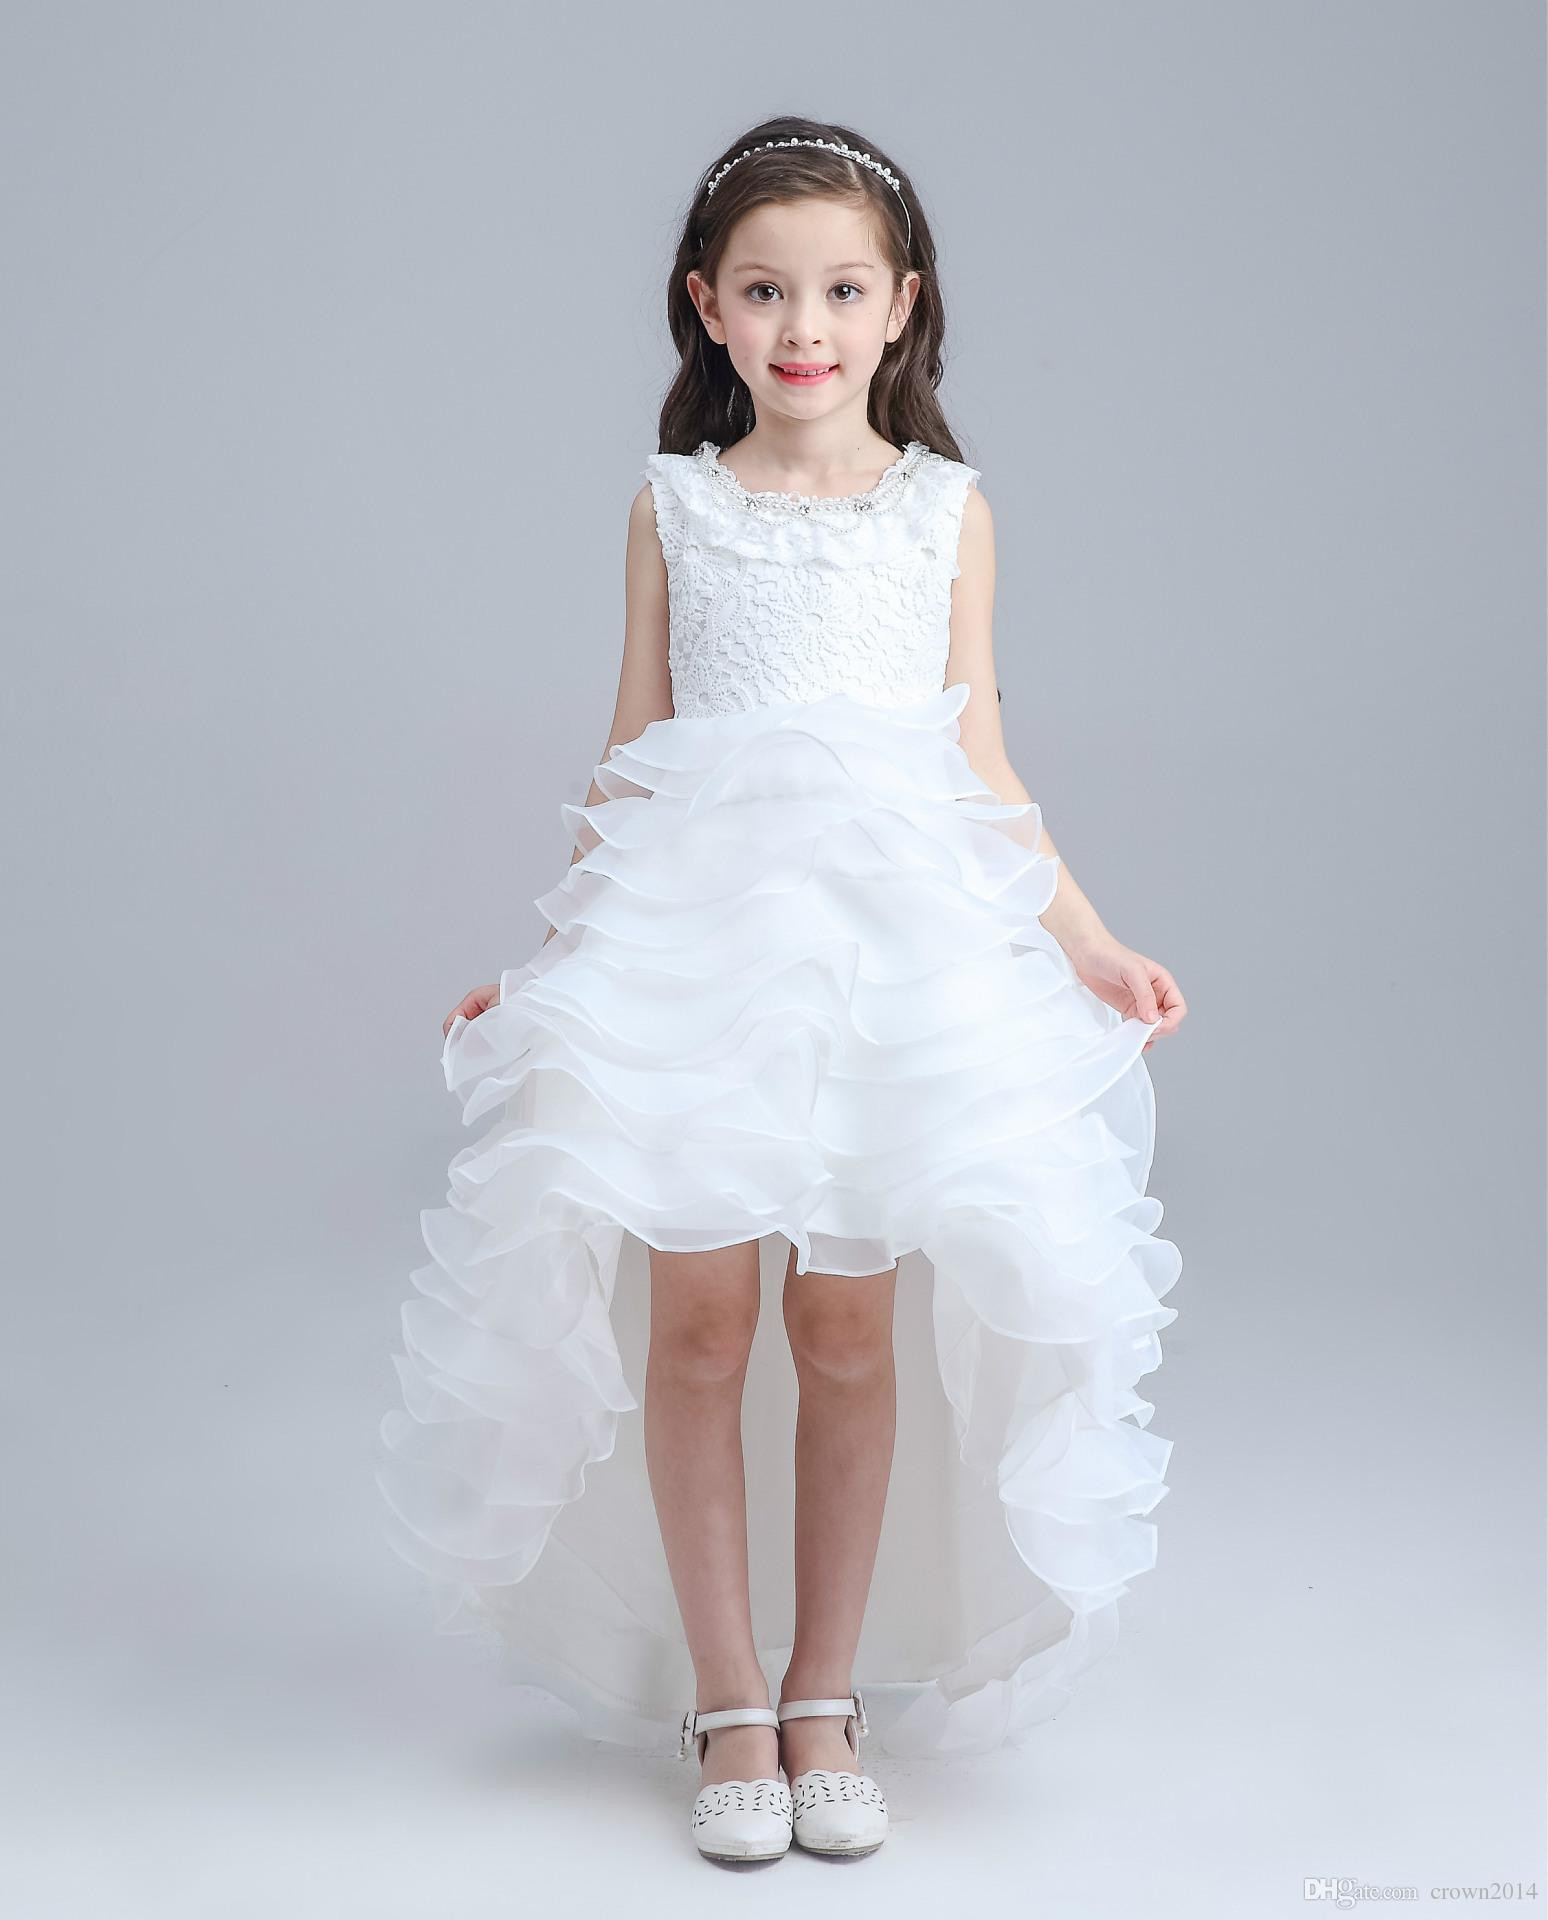 Child Party Dress
 White Princess Lace Children Flower Girl Dresses For